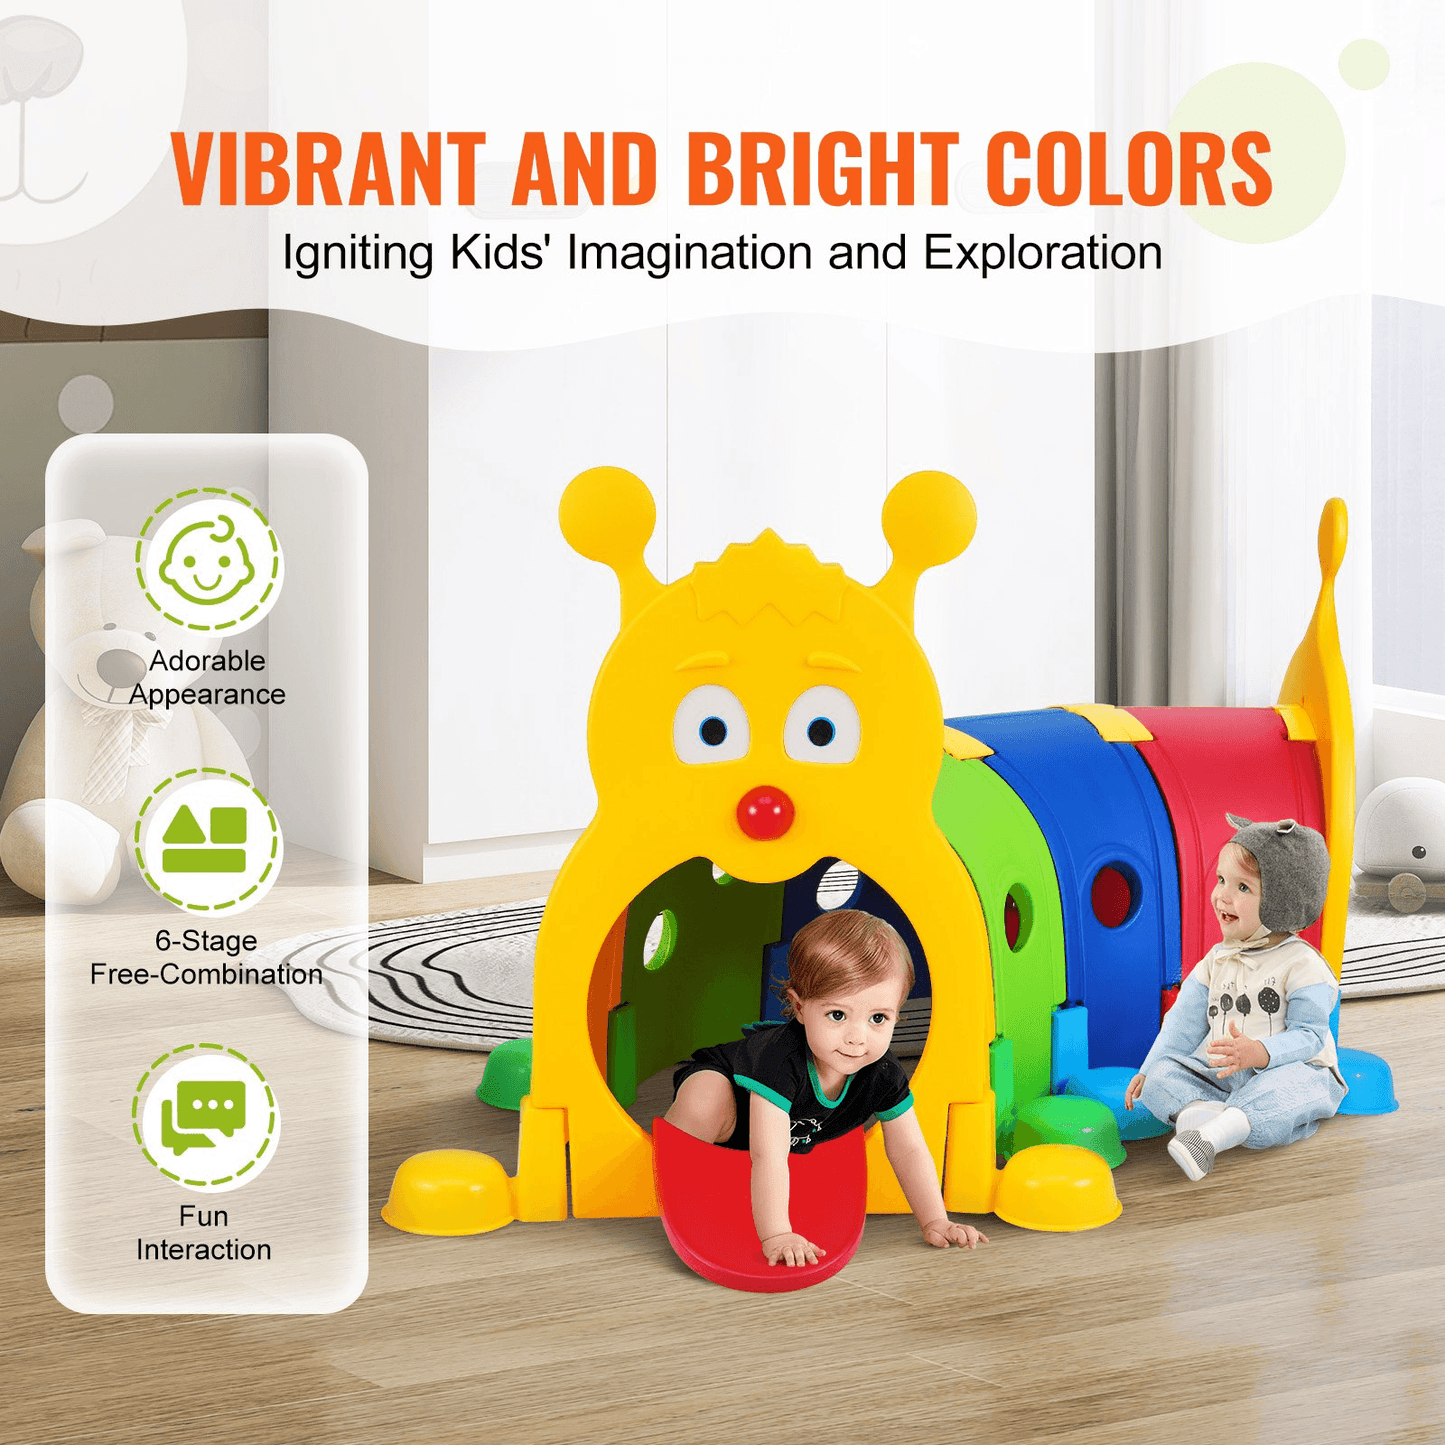 VEVOR Caterpillar Tunnel for Kids, Outdoor Indoor Climb and Crawl Through, Play Equipment for Toddler,Boys,Girls,Baby 3-6, 4 Sections, for Daycare, Preschool, Playground, Multicolor - Loomini